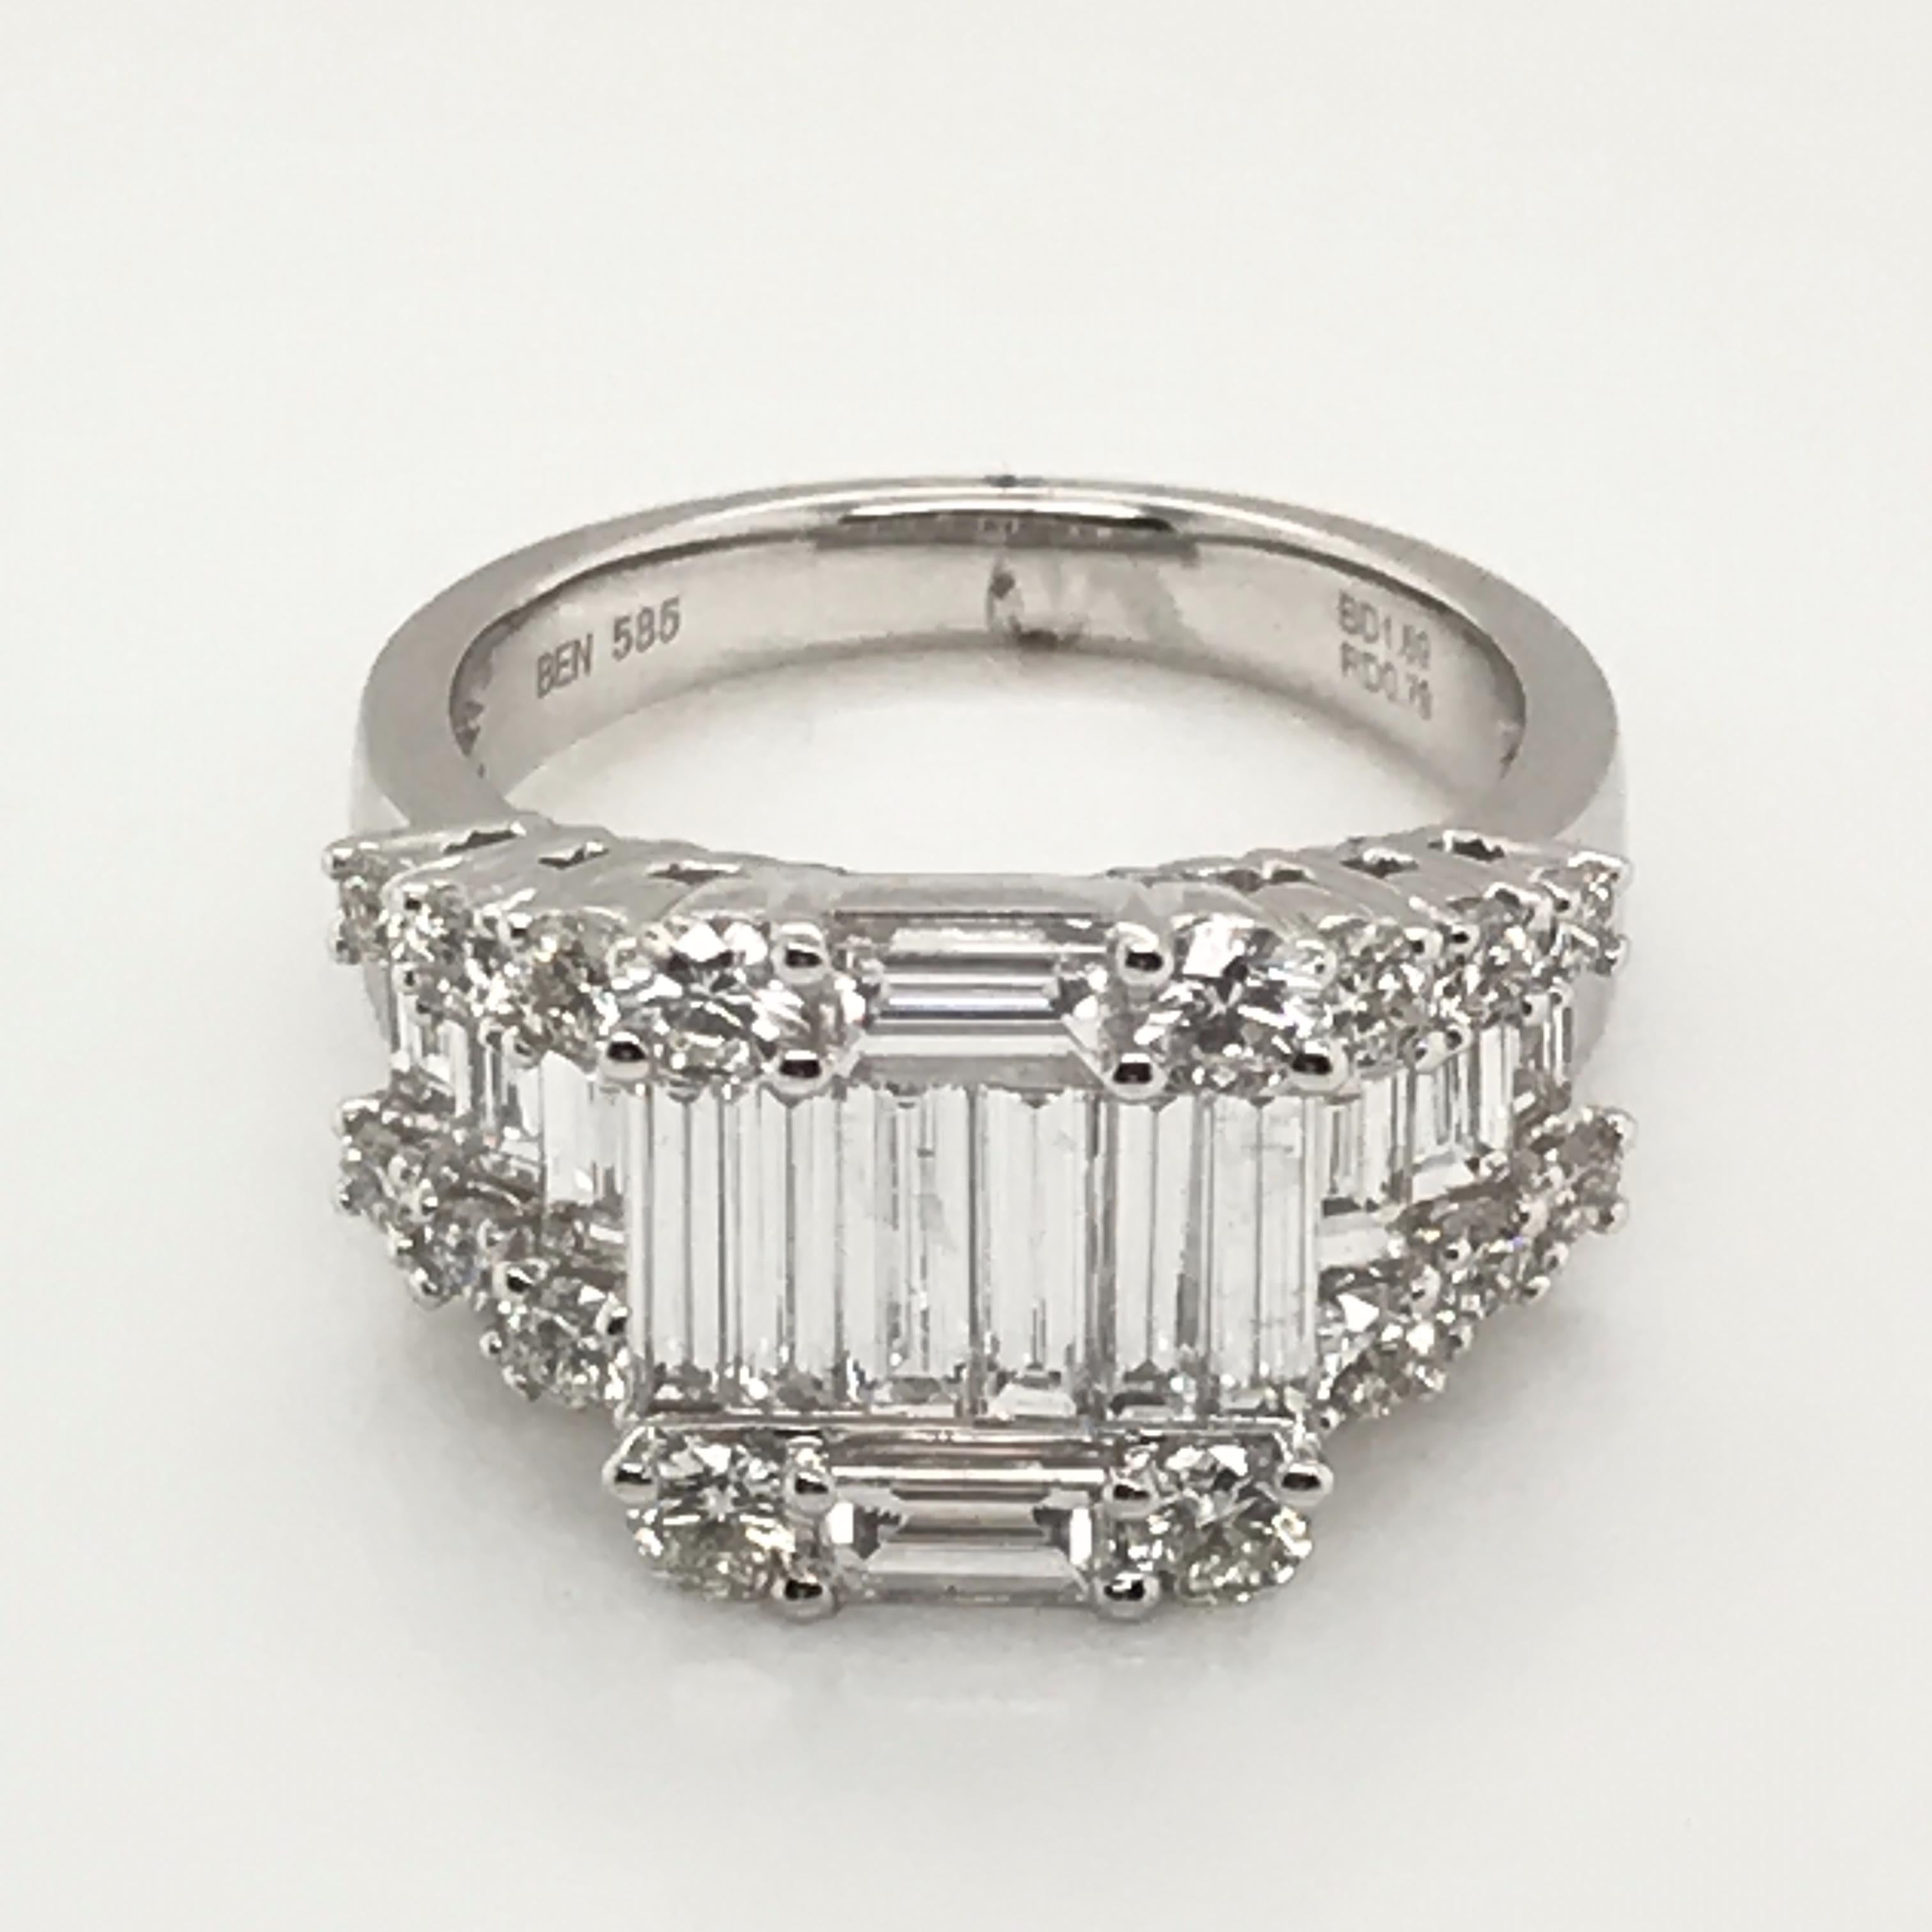 HJN Inc. Ring featuring a Baguette and Round Diamond Ring

Round-Cut Diamond Weight: 2.54 Carats

Total Stones: 30
Clarity Grade: SI1
Color Grade: H
Total Diamond Weight: 2.54 Carats
Polish and Symmetry: Very Good
Style Number: KV2180DWG